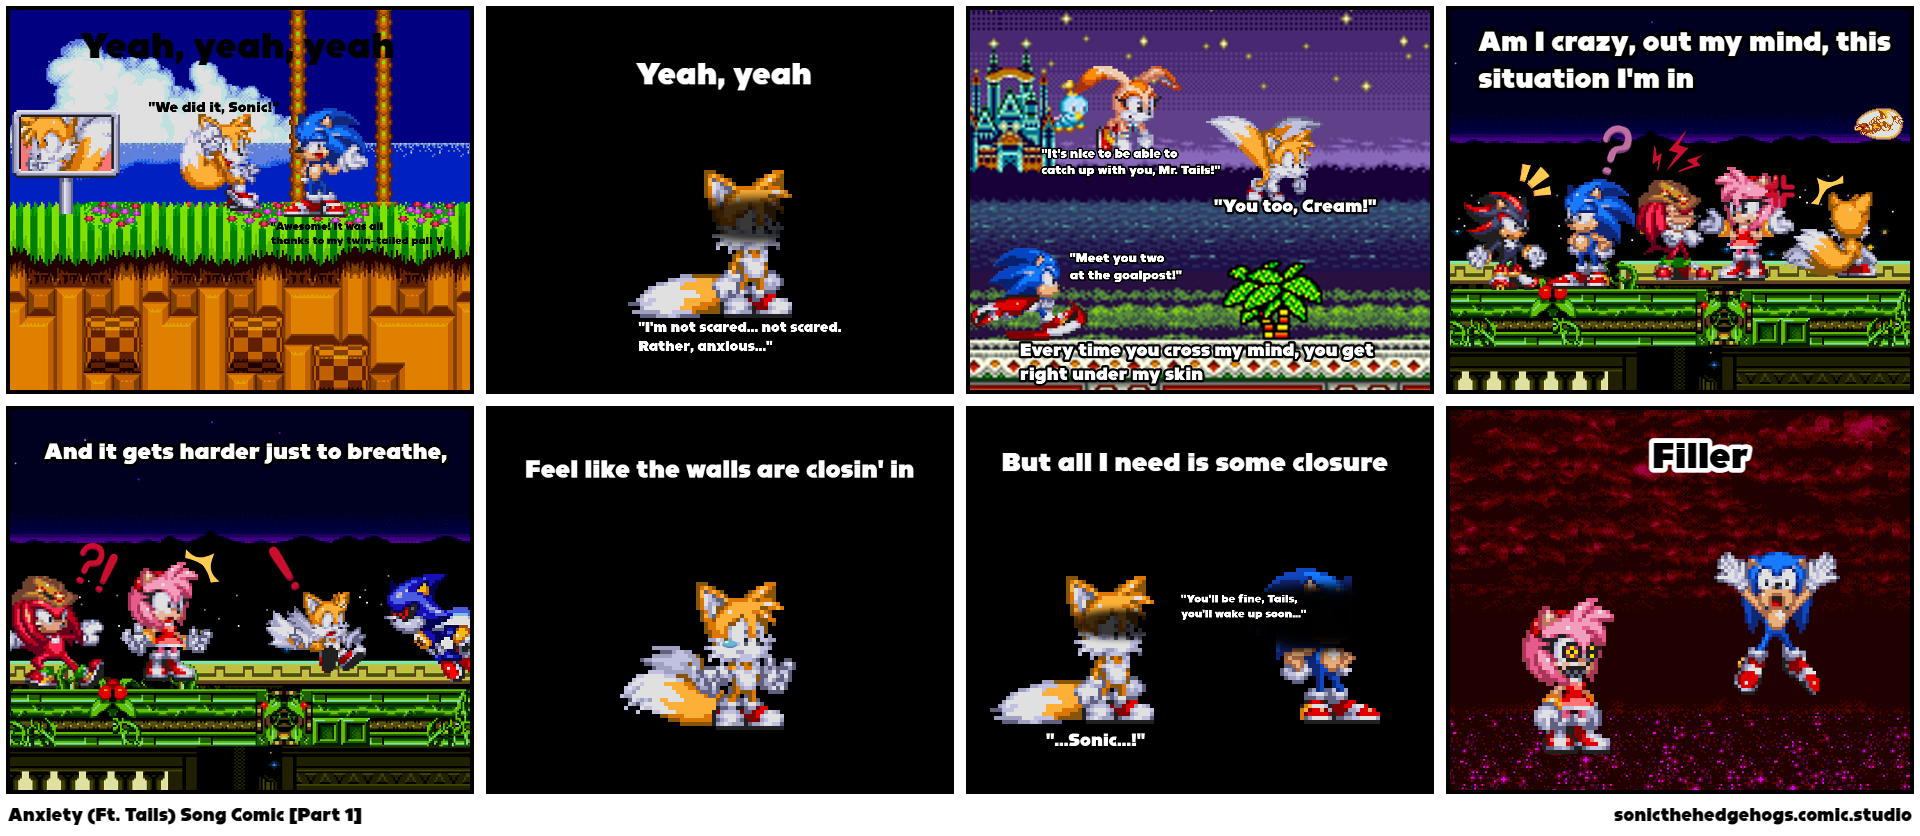 Anxiety (Ft. Tails) Song Comic [Part 1]